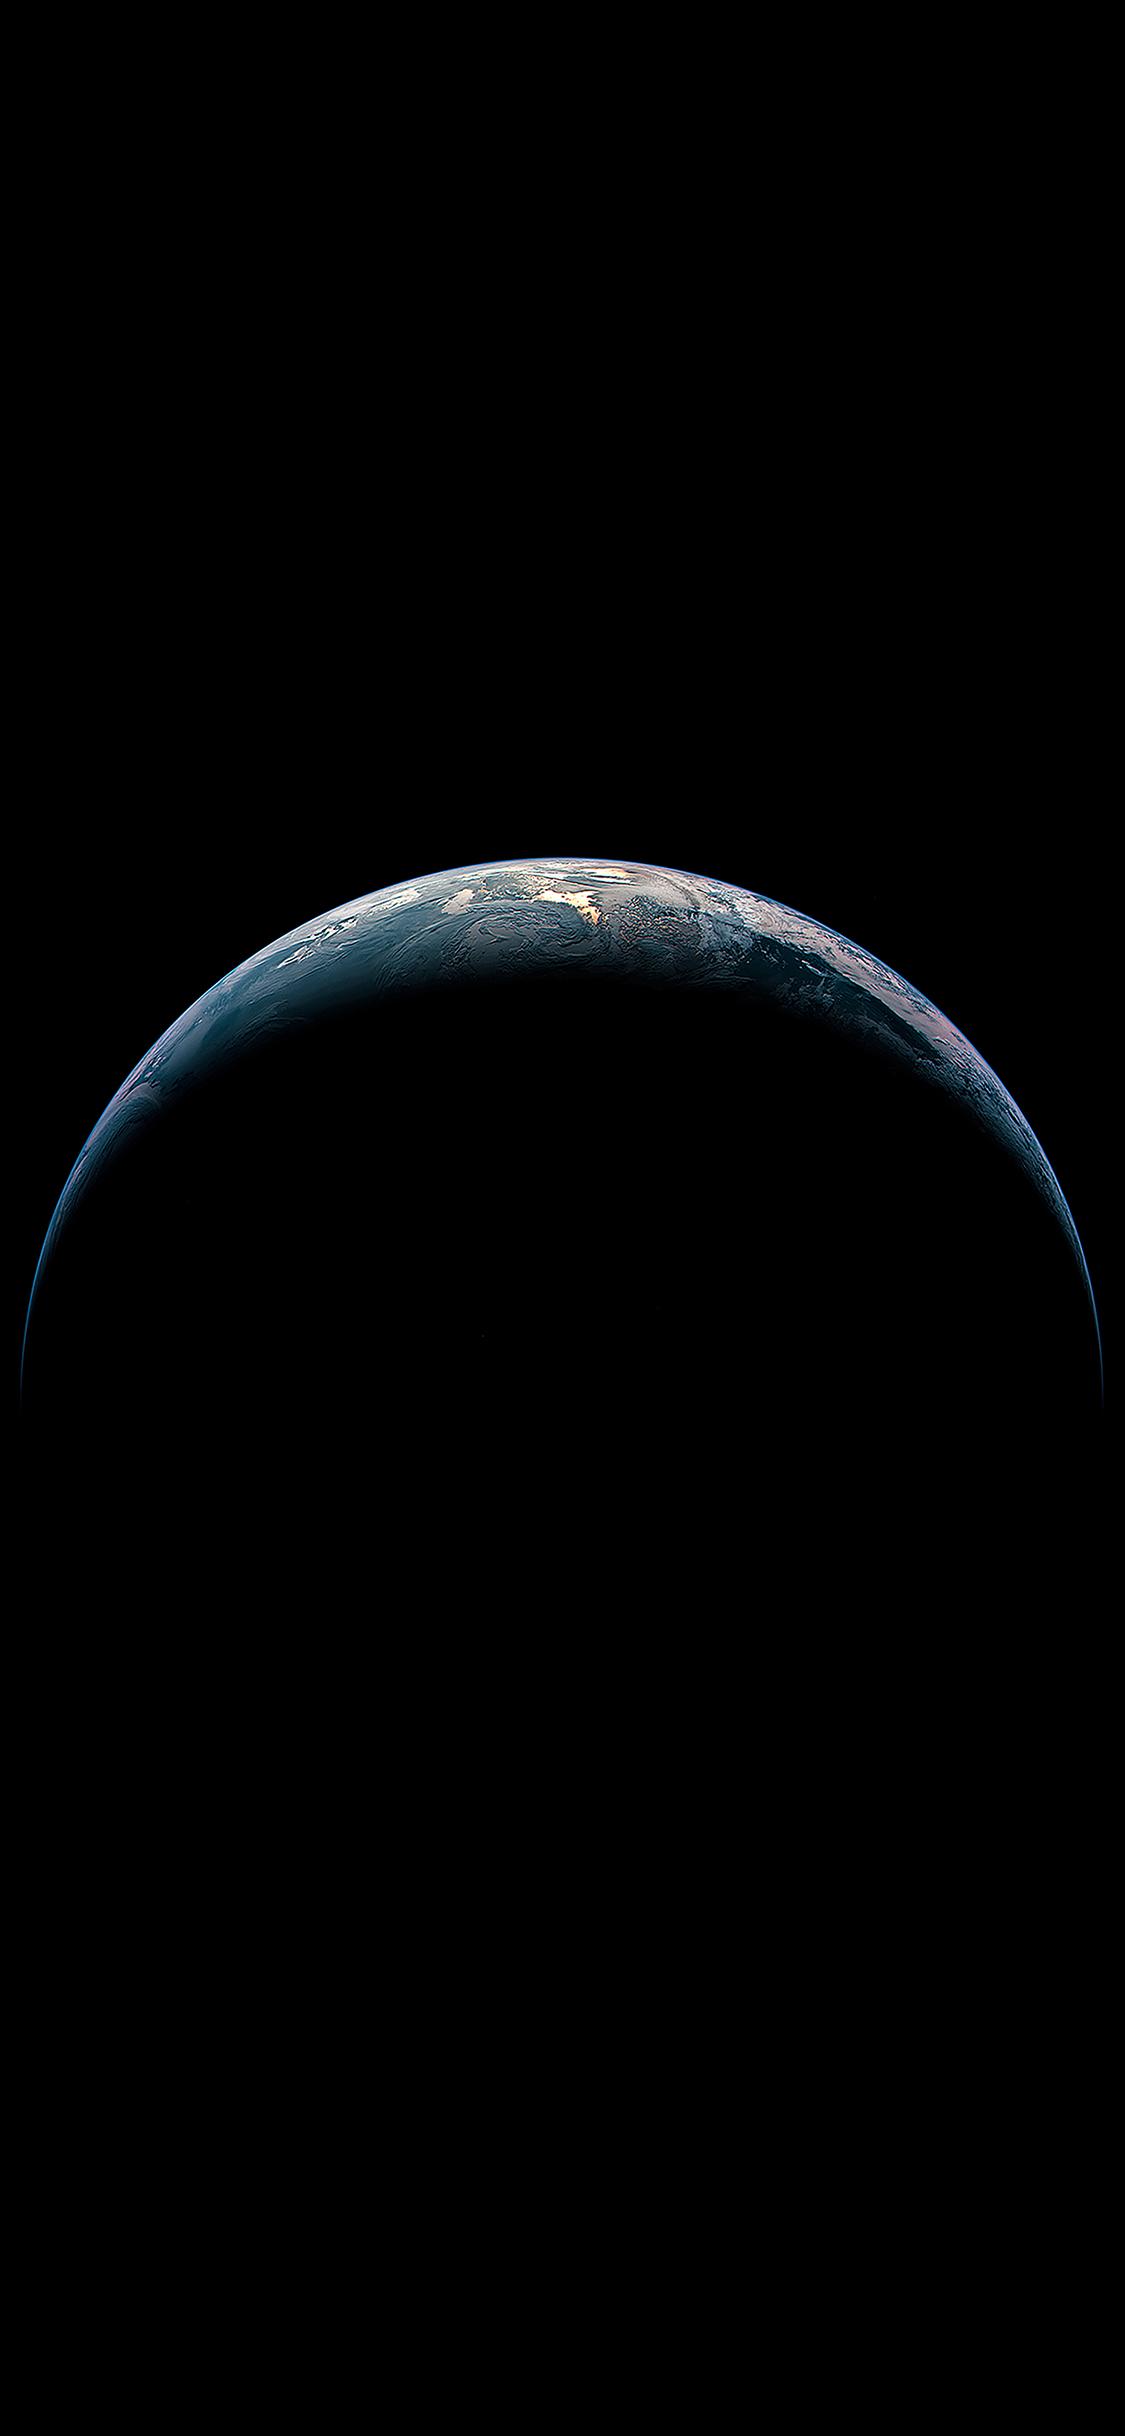 Wallpaper Ios8 Apple Iphone6 Plus Earth From Sky Wallpaper